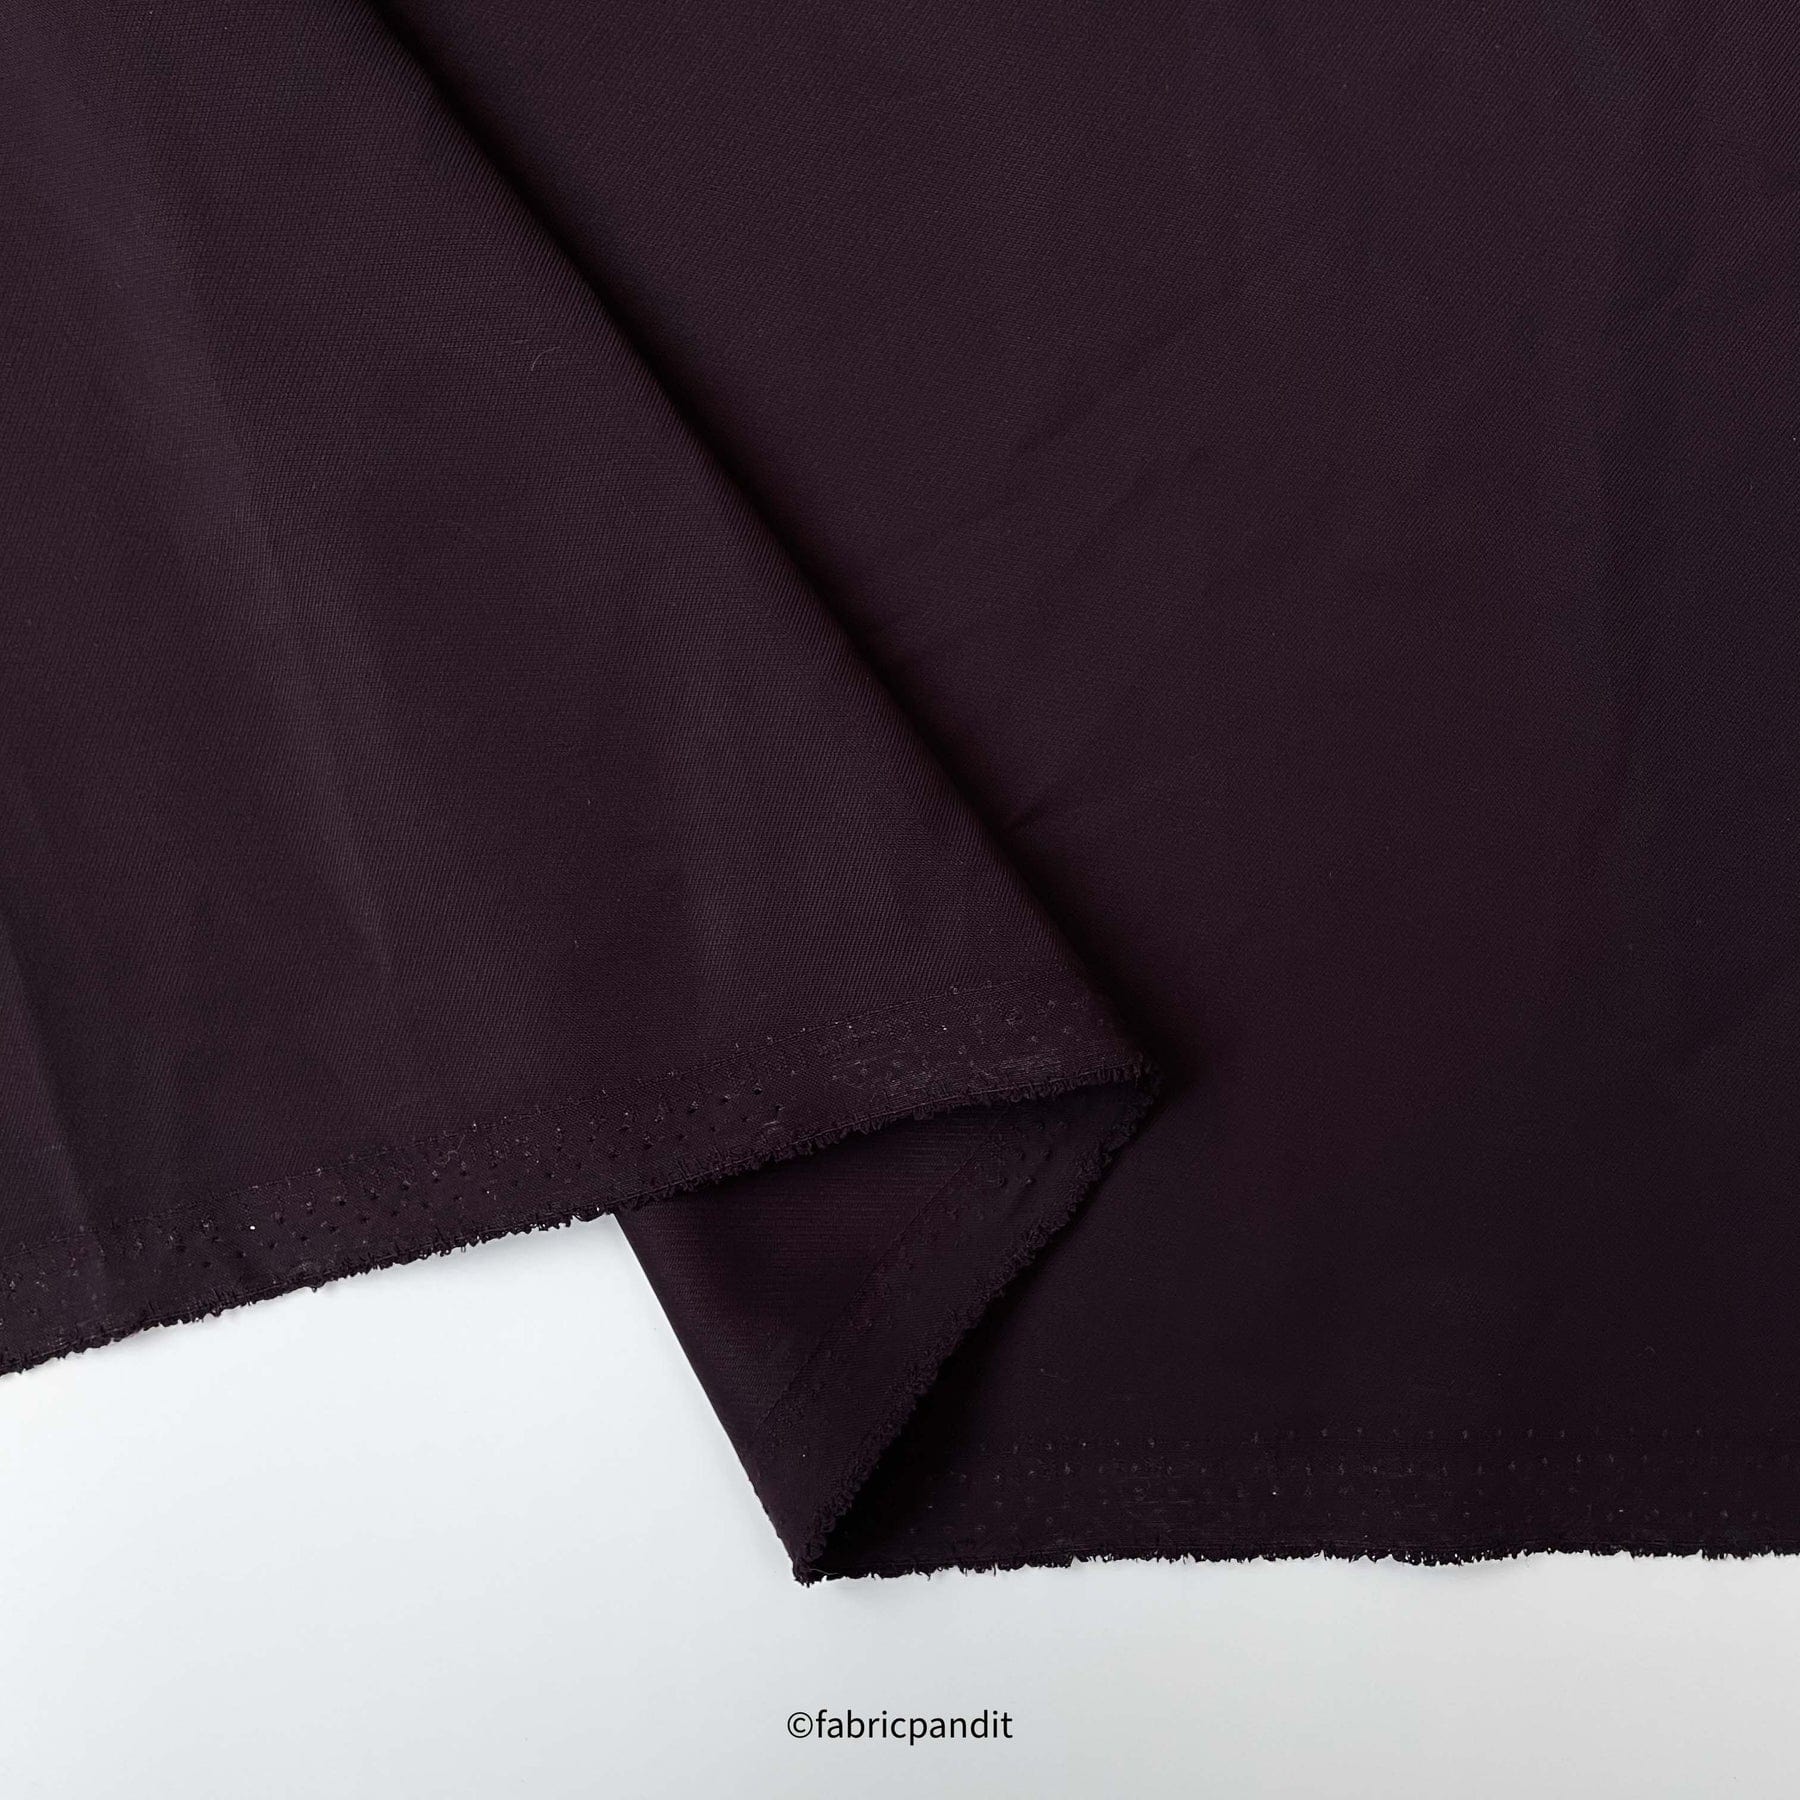 fabric pandit fabric regal purple satin luxury suiting fabric width 58 inches 36446980243631